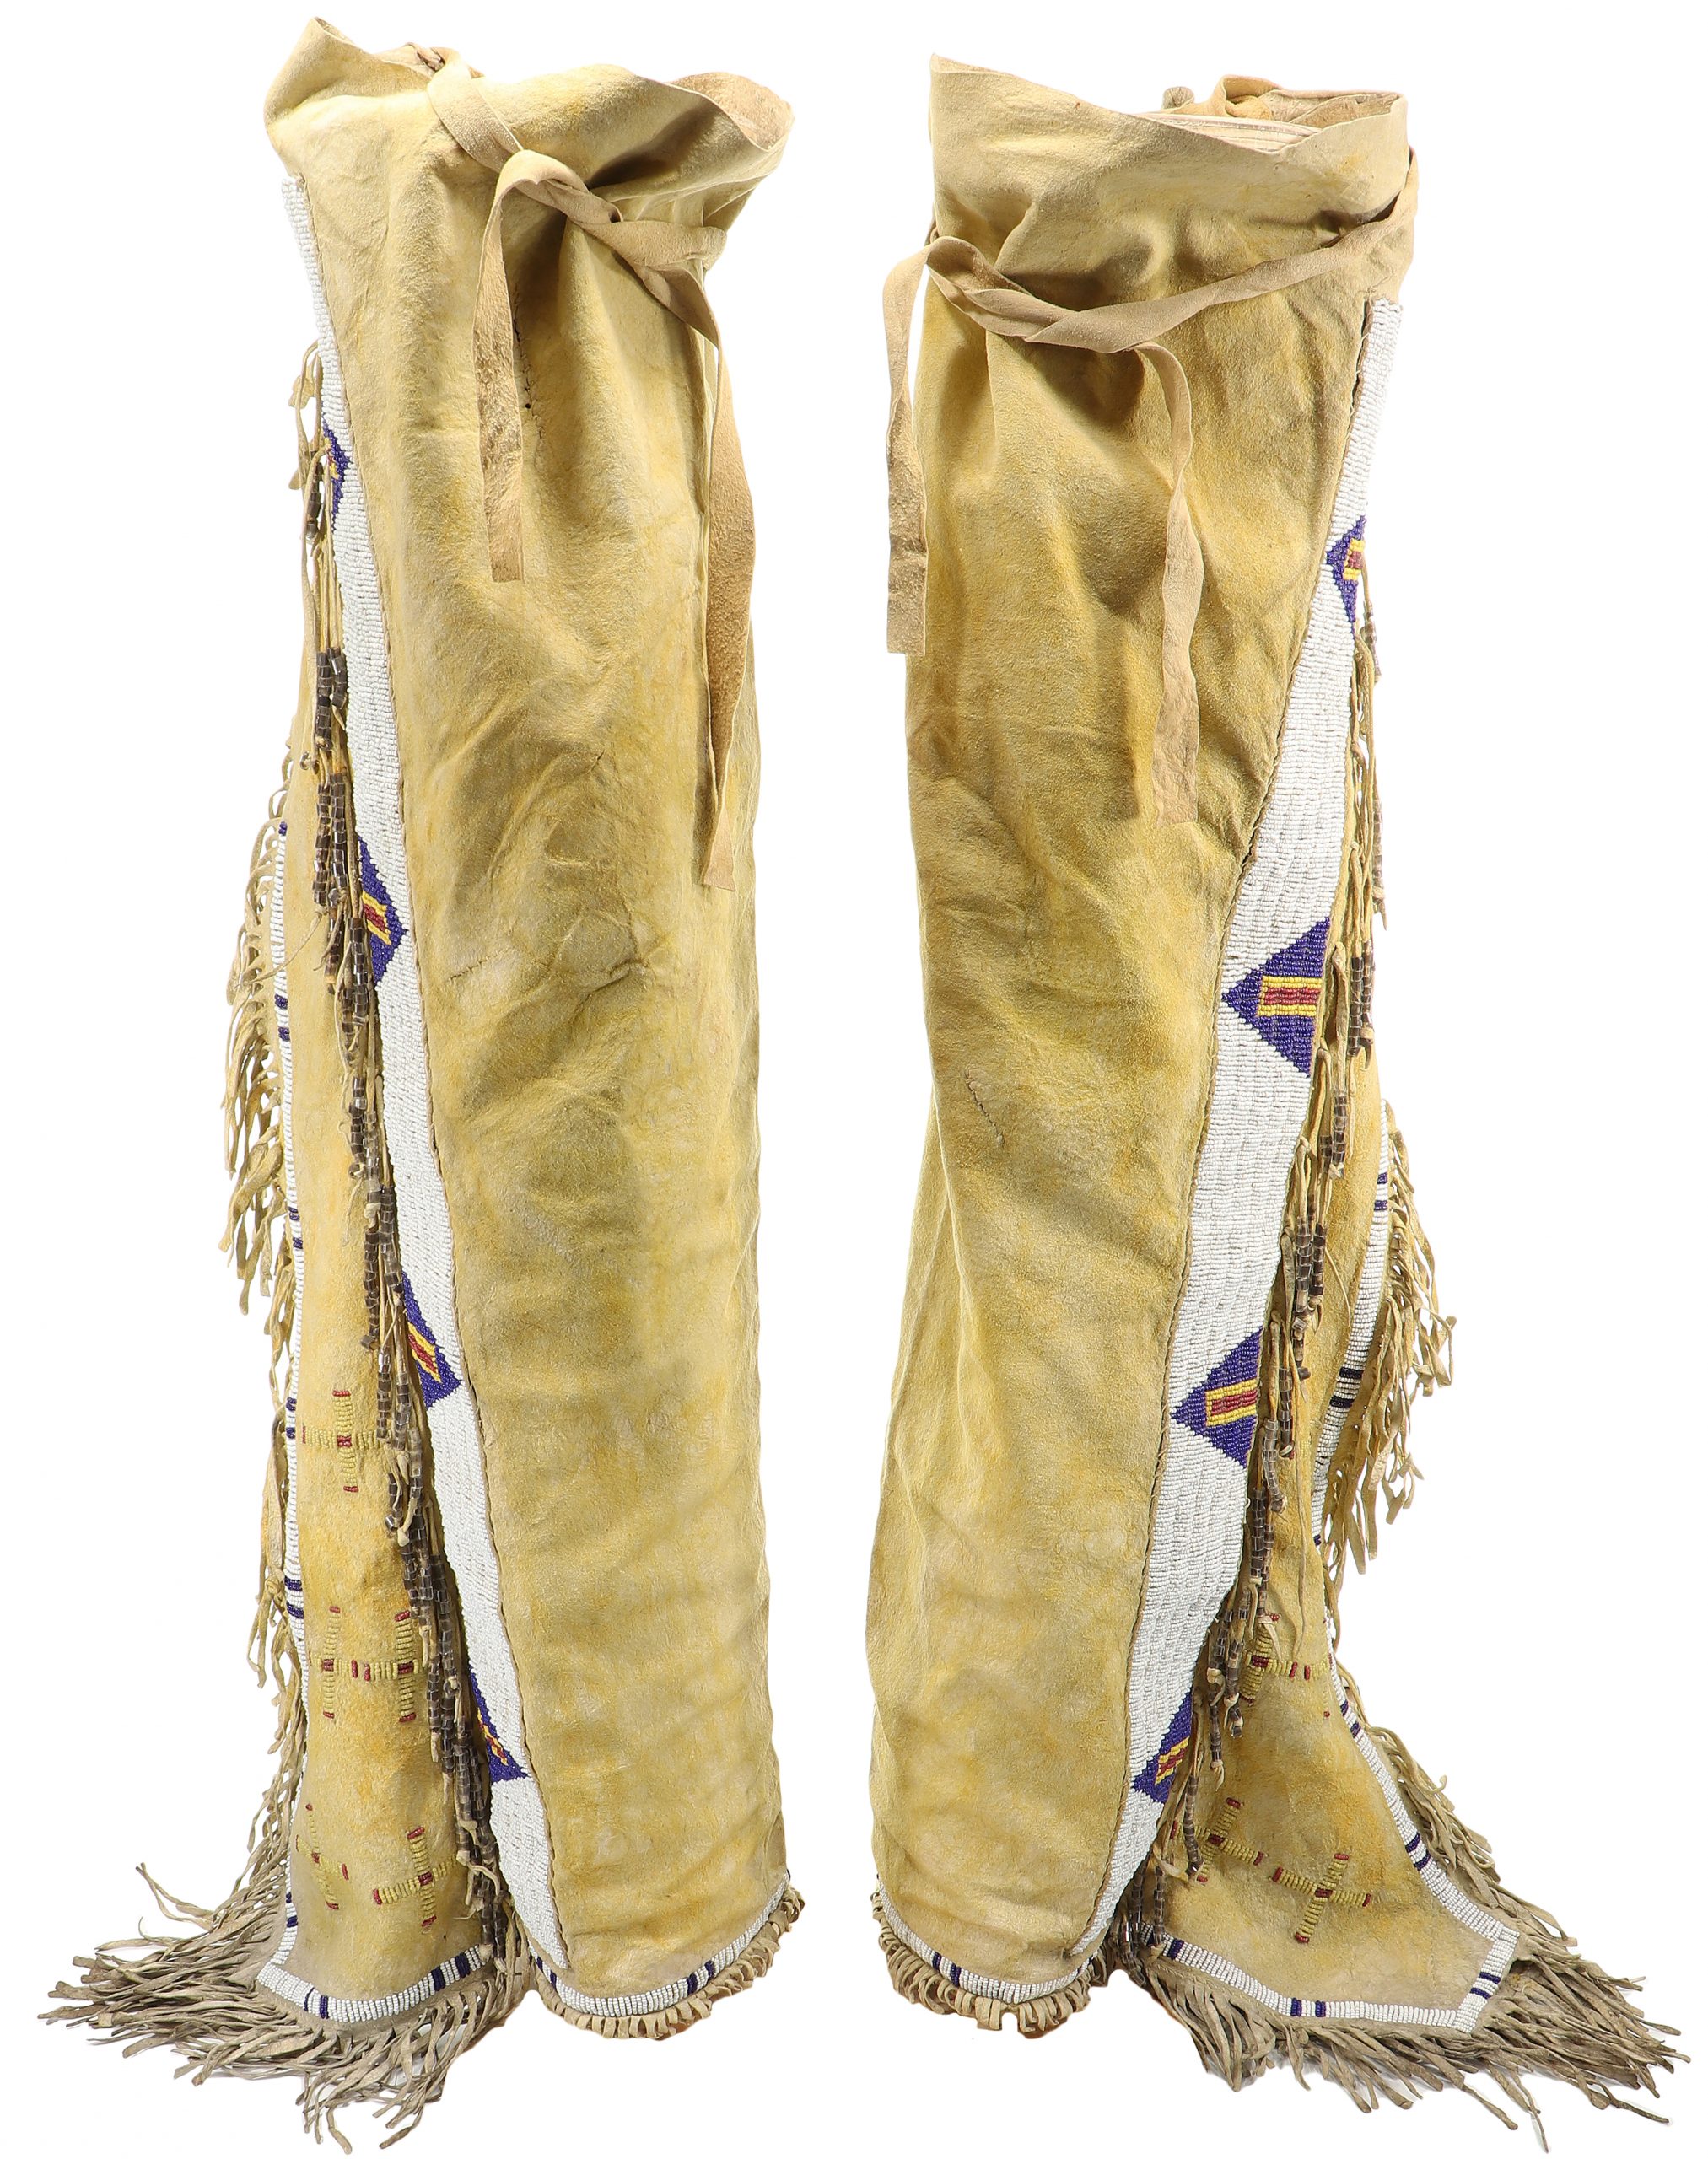 Lot - Sioux Native American Indian beaded leather leggings with diamond  design, c. 1880-1890.